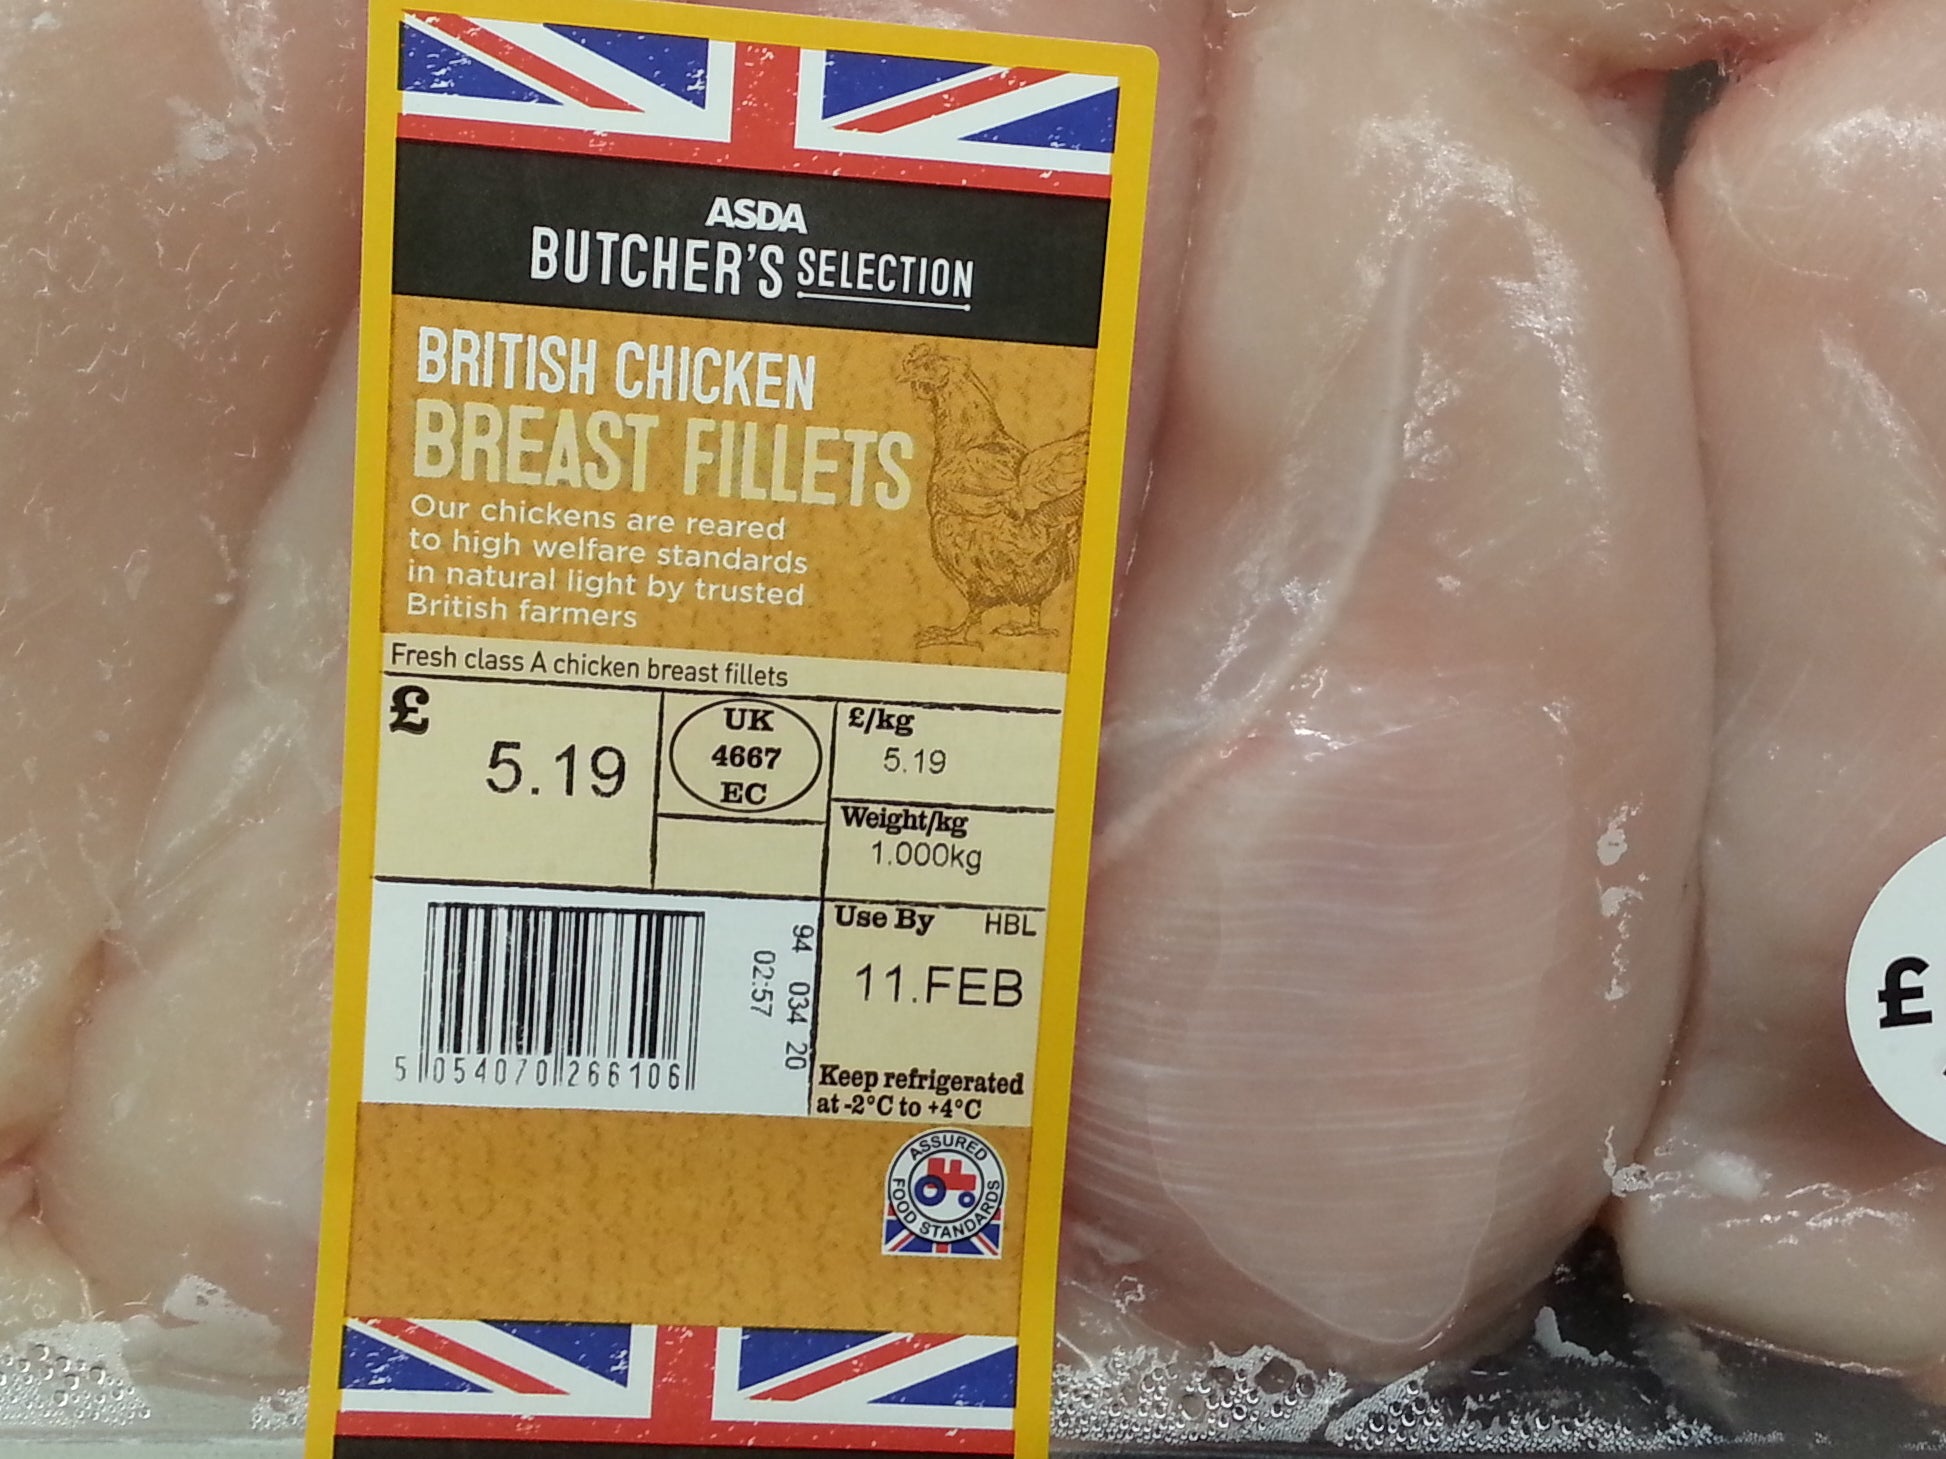 The white striping - a sign of disease - is clearly seen on Asda chicken fillets